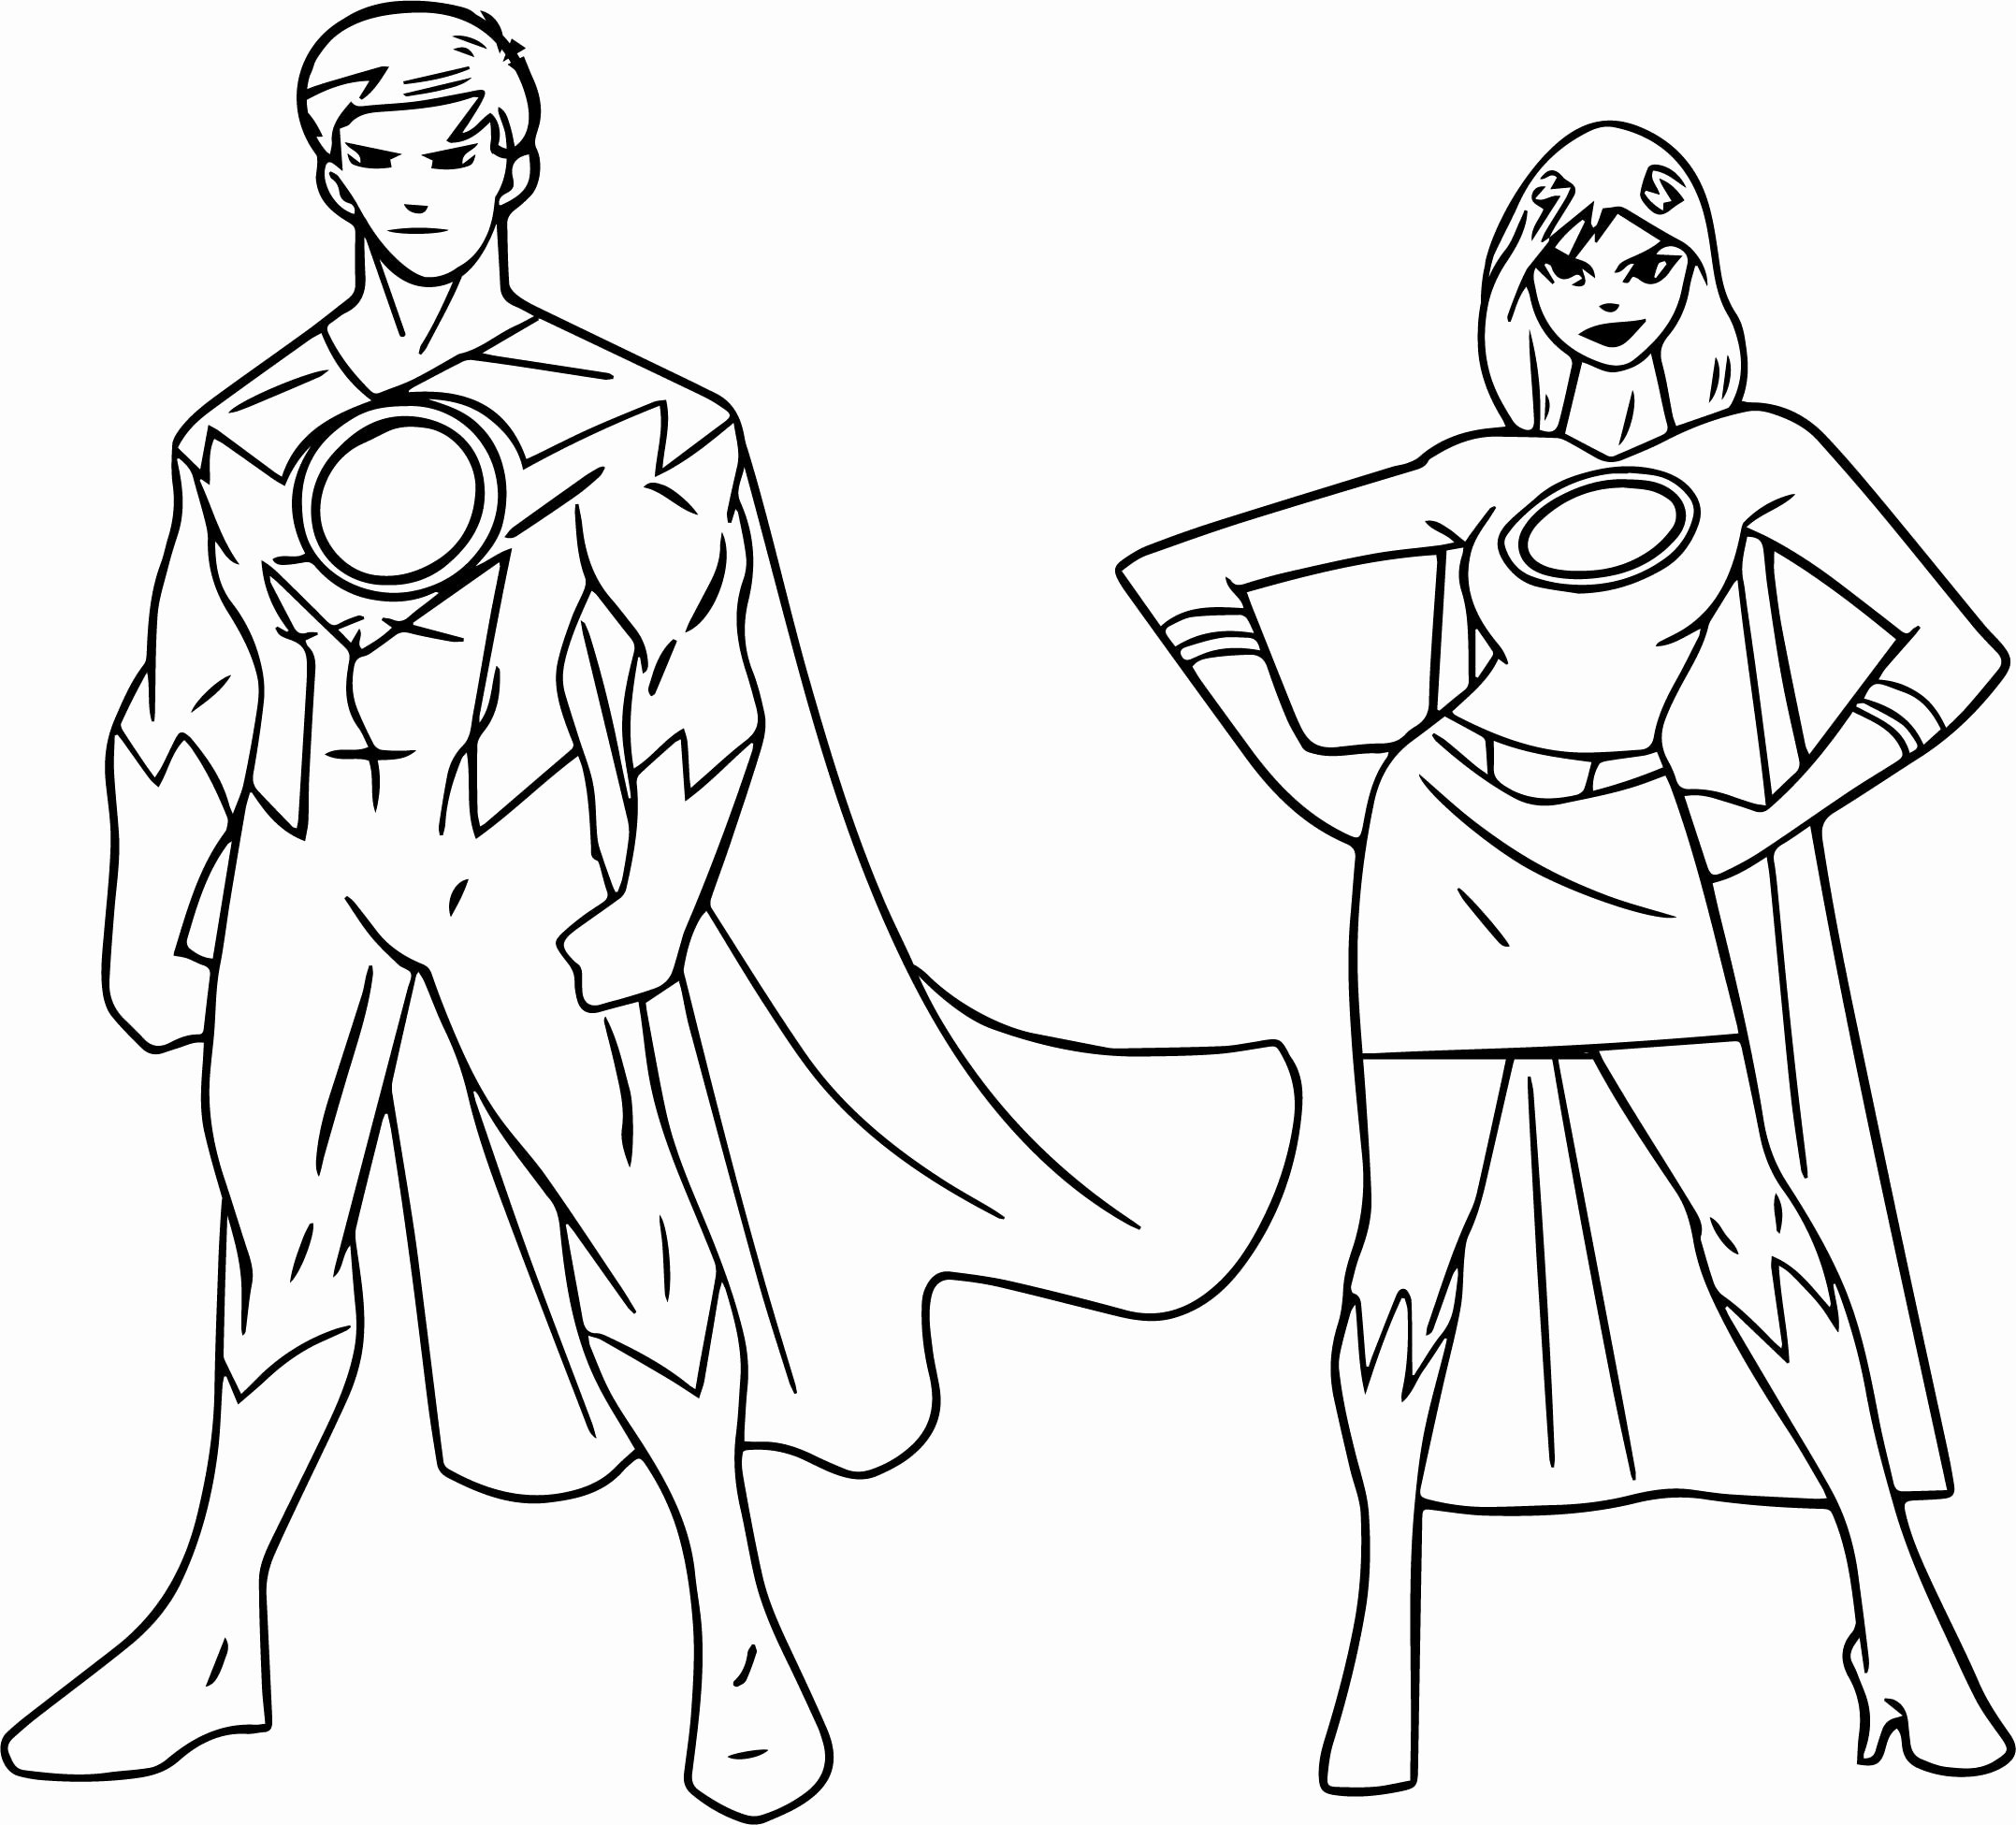 Female Superhero Coloring Pages Lovely Superheroes Free Coloring Pages